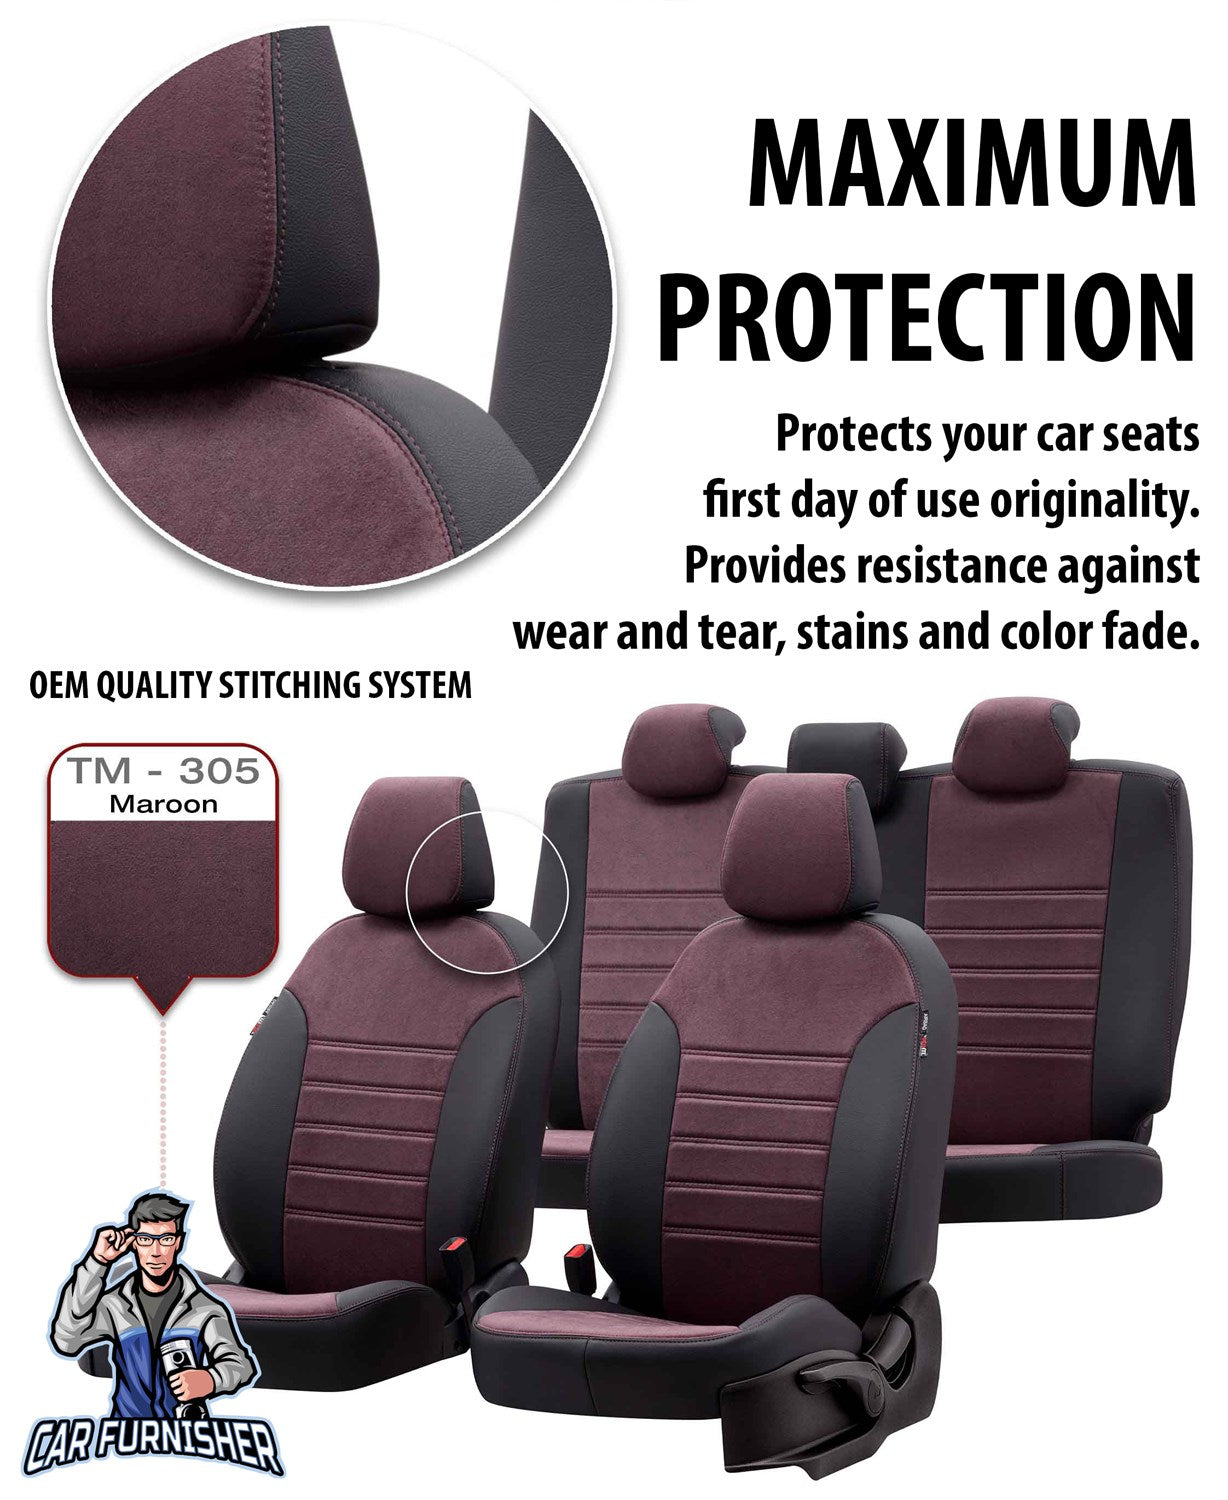 Volkswagen Polo Seat Cover Milano Suede Design Smoked Black Leather & Suede Fabric